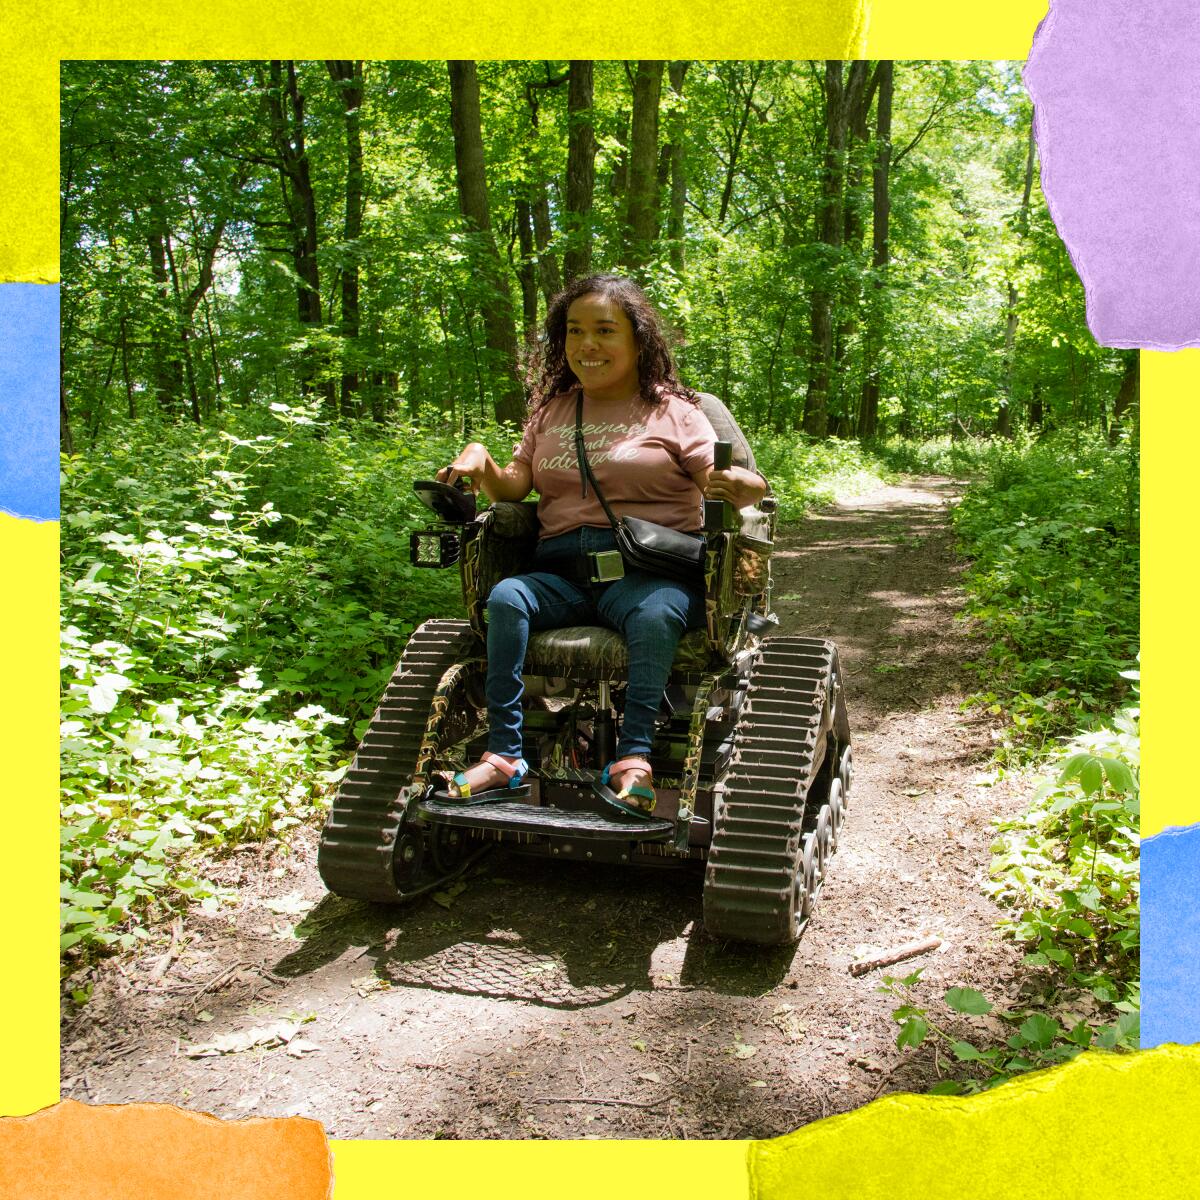 A person smiles while riding a small vehicle with continuous tracks instead of wheels.